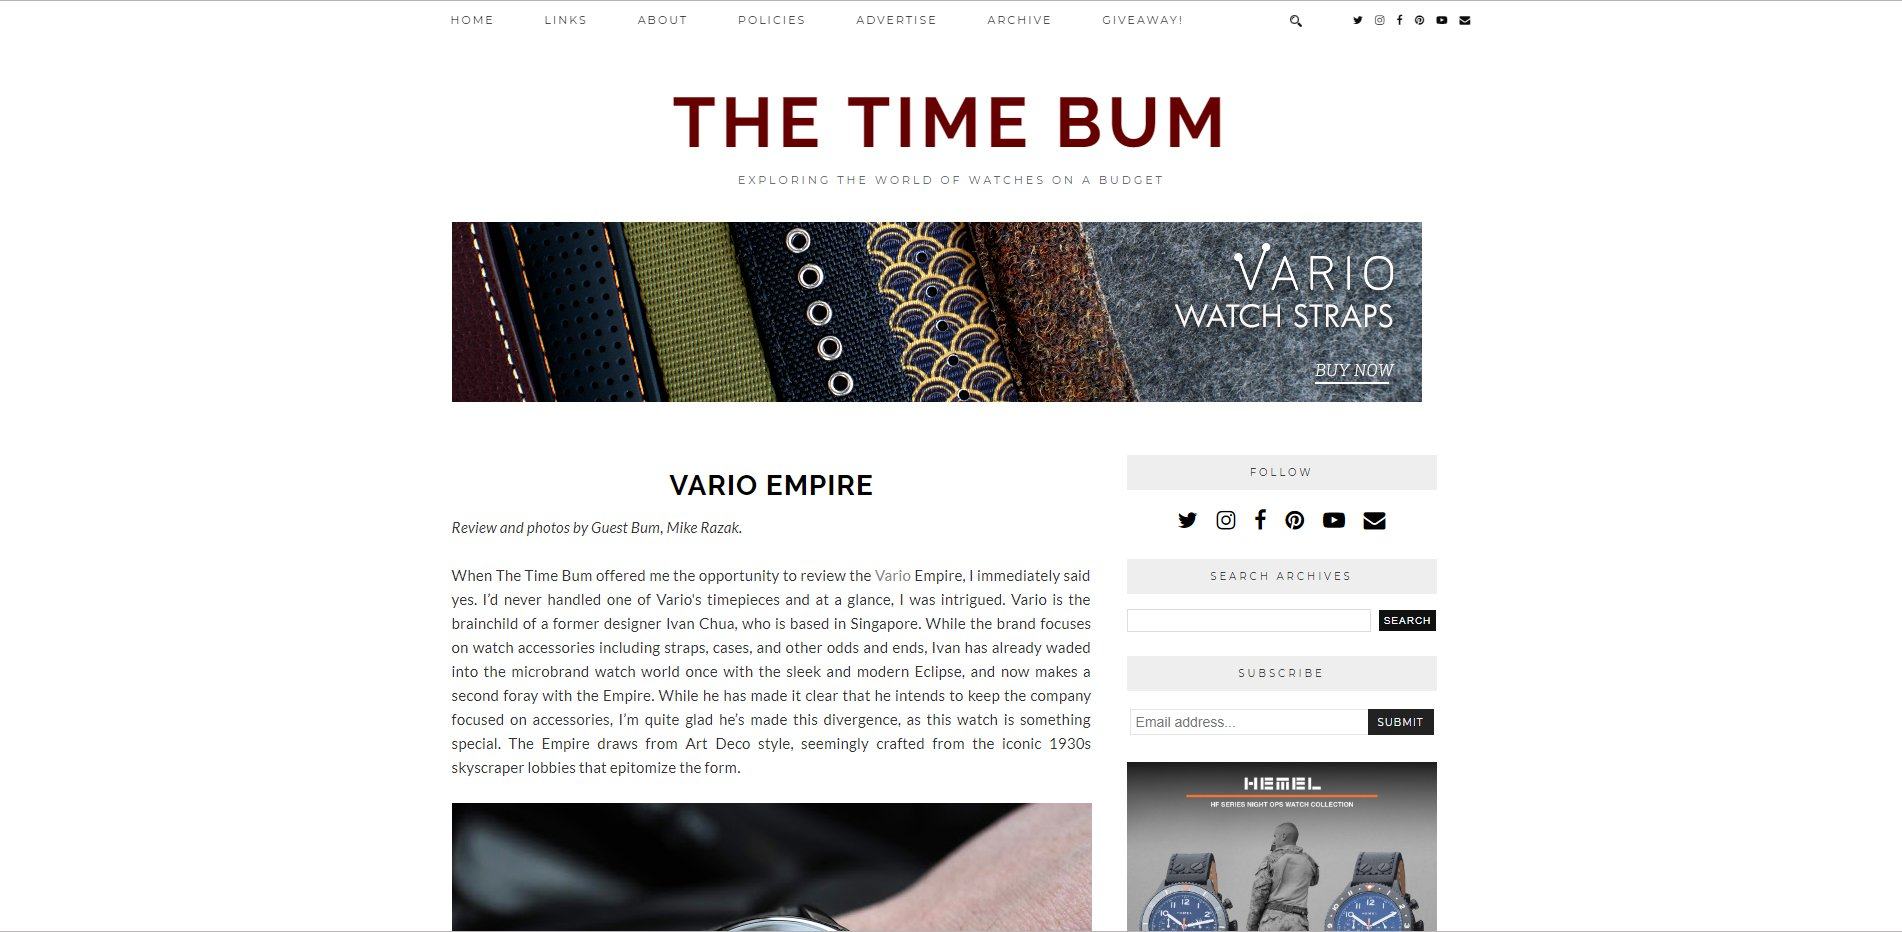 Vario Empire Review by The Time Bum